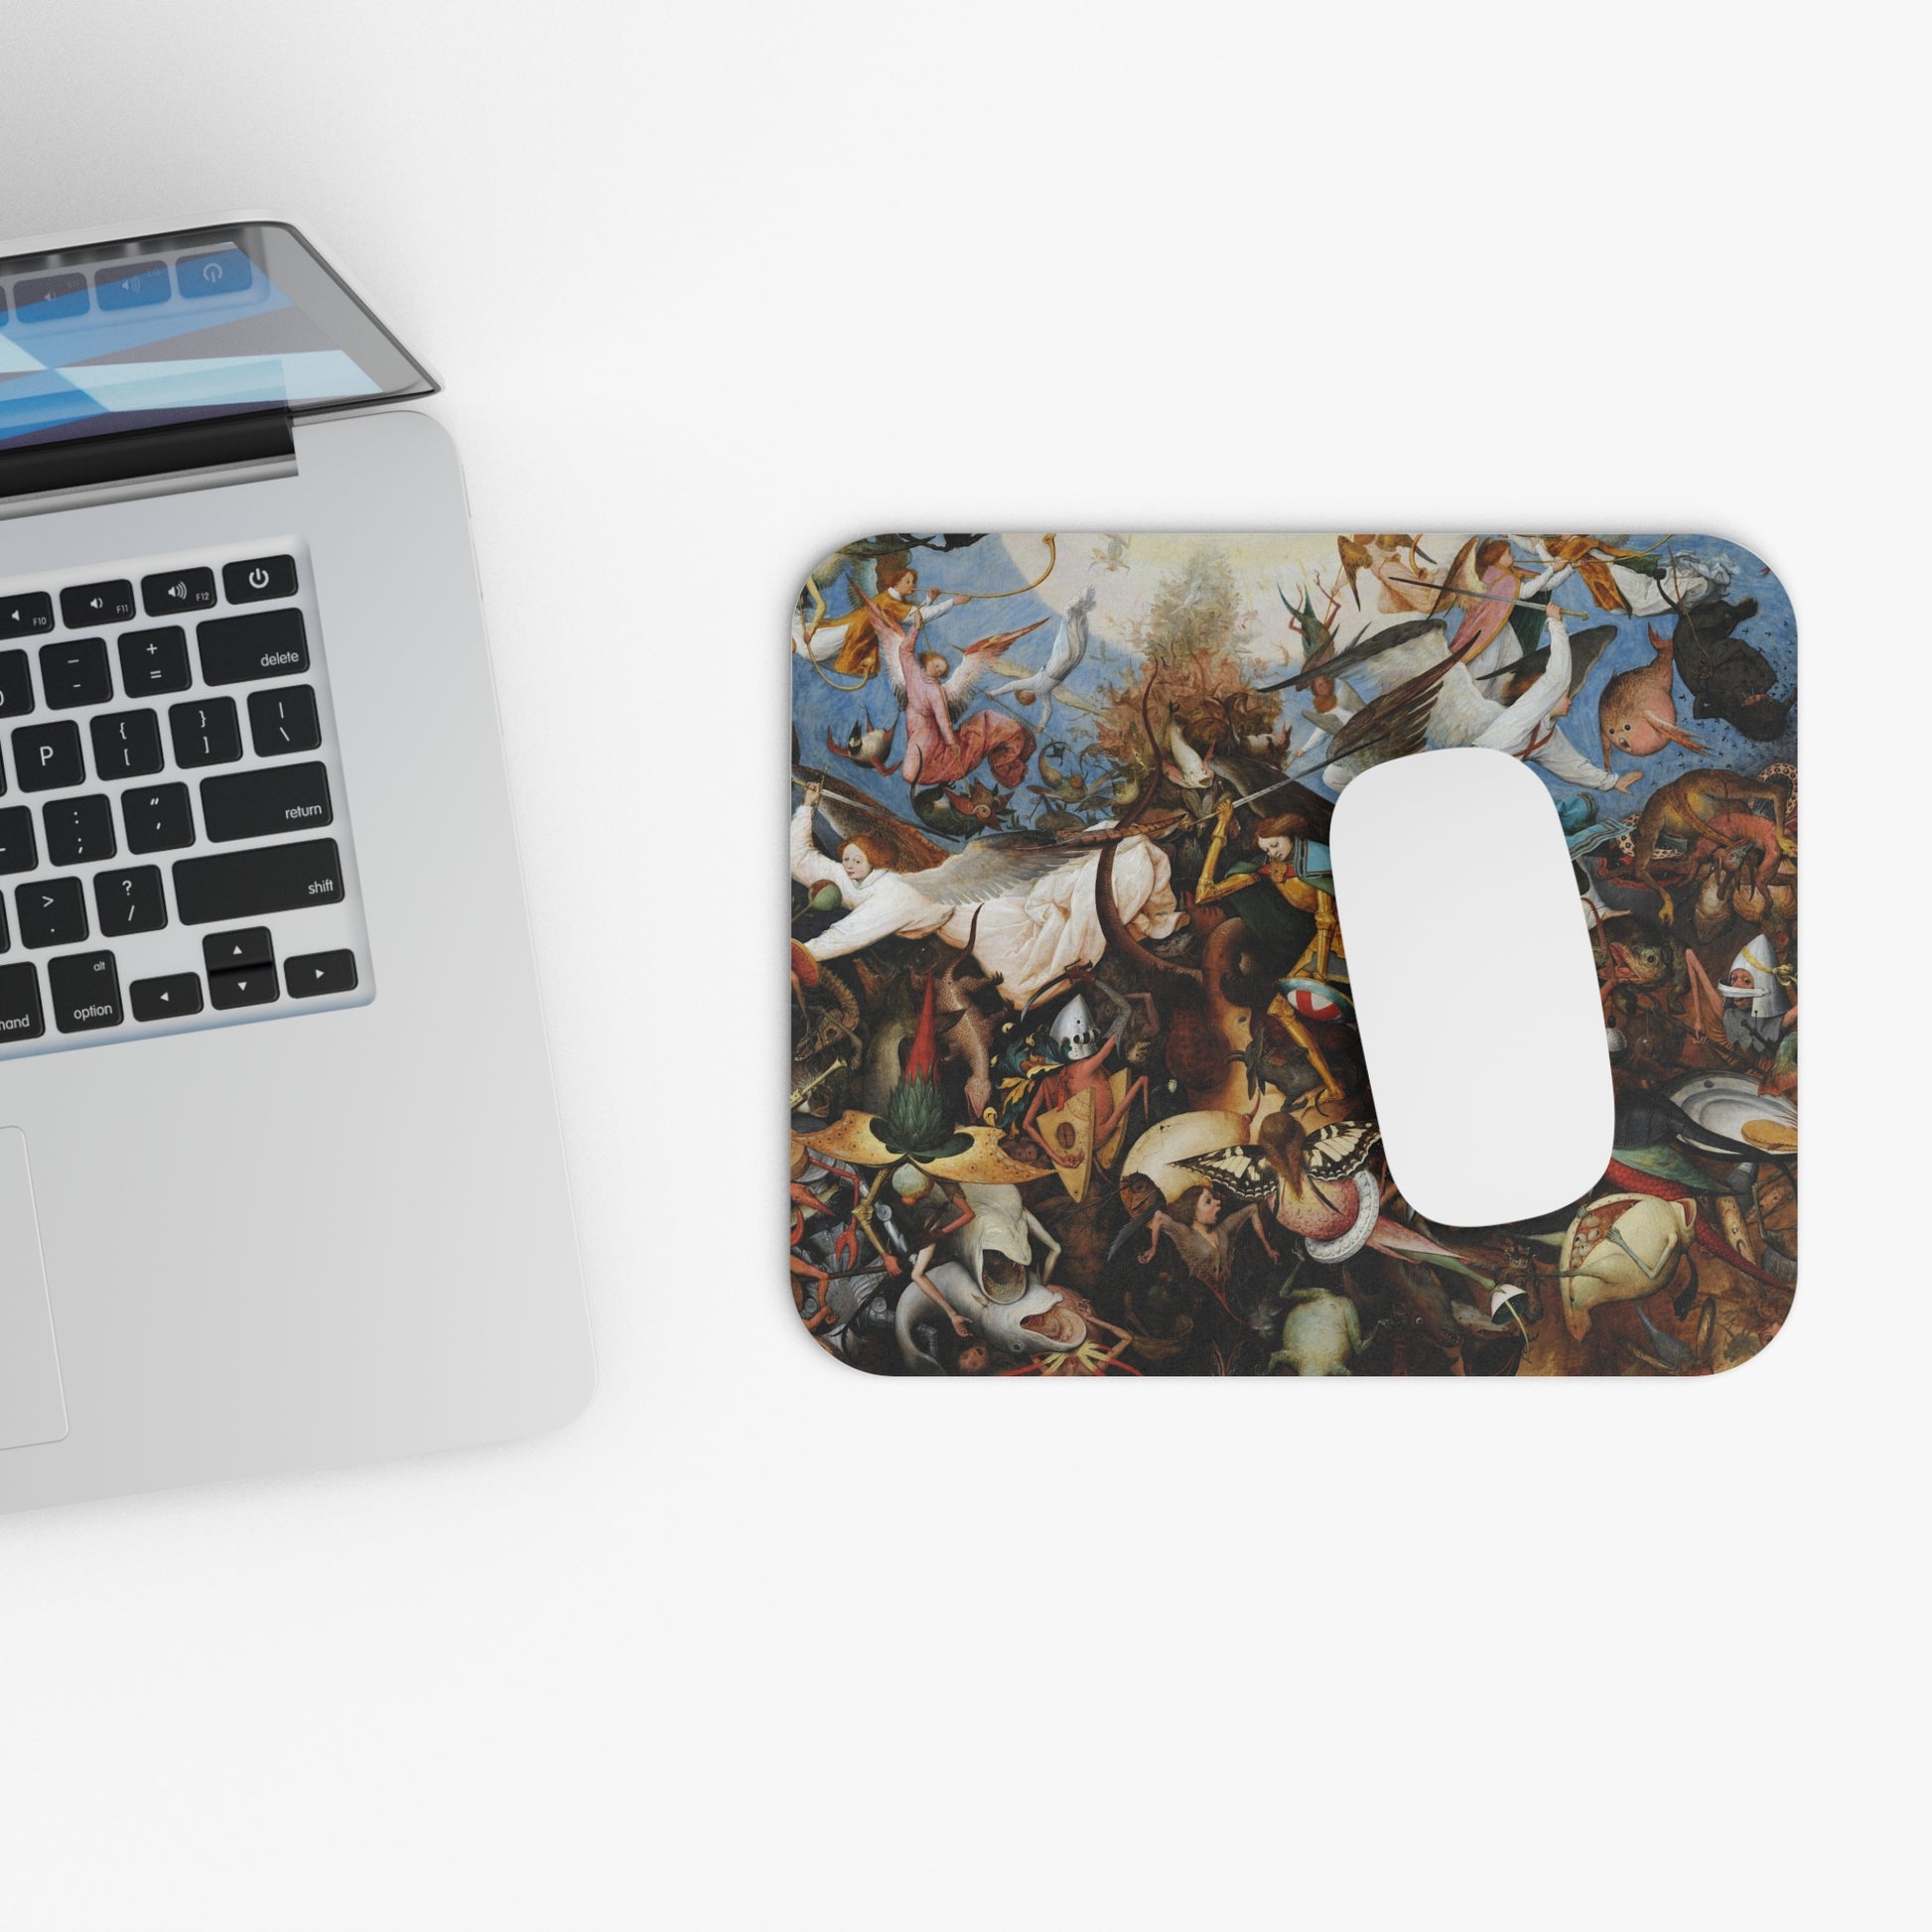 PETER BRUEGEL - THE FALL OF ROUGH ANGELS - ART MOUSE PAD